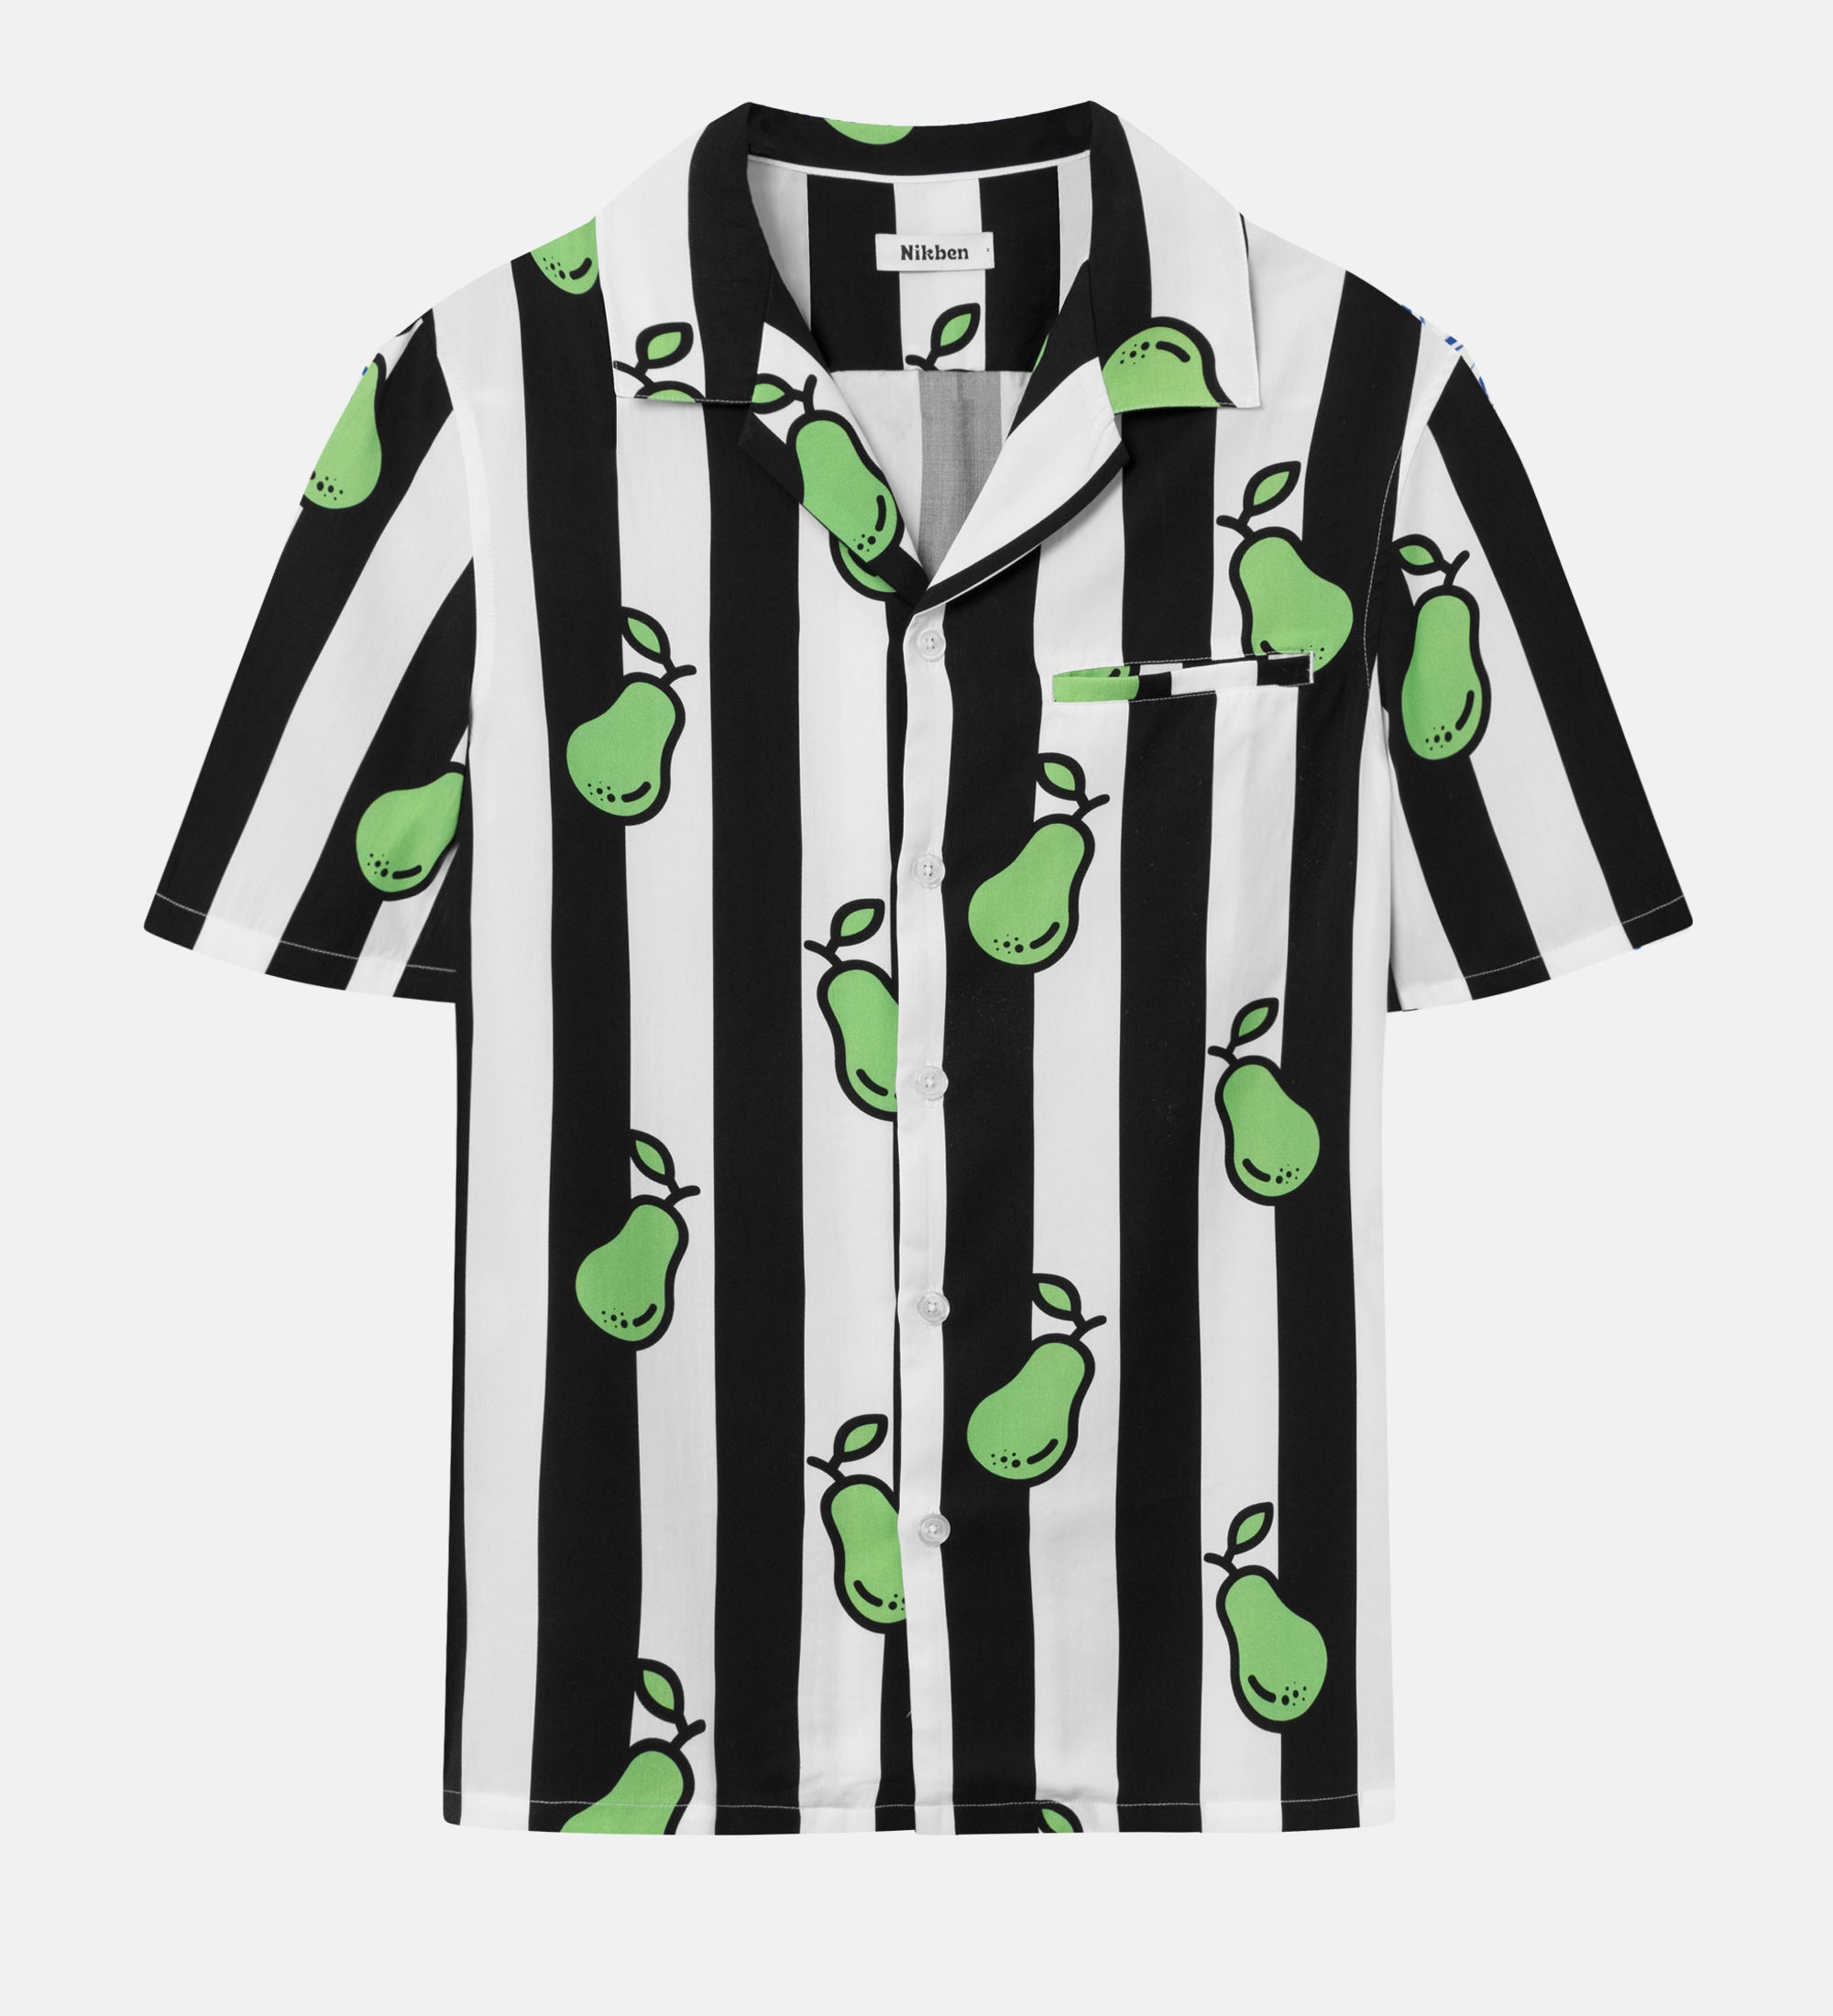 Black and white short-sleeved vacation shirt with green pear illustrations, open collar, one breast pocket, and button closure.